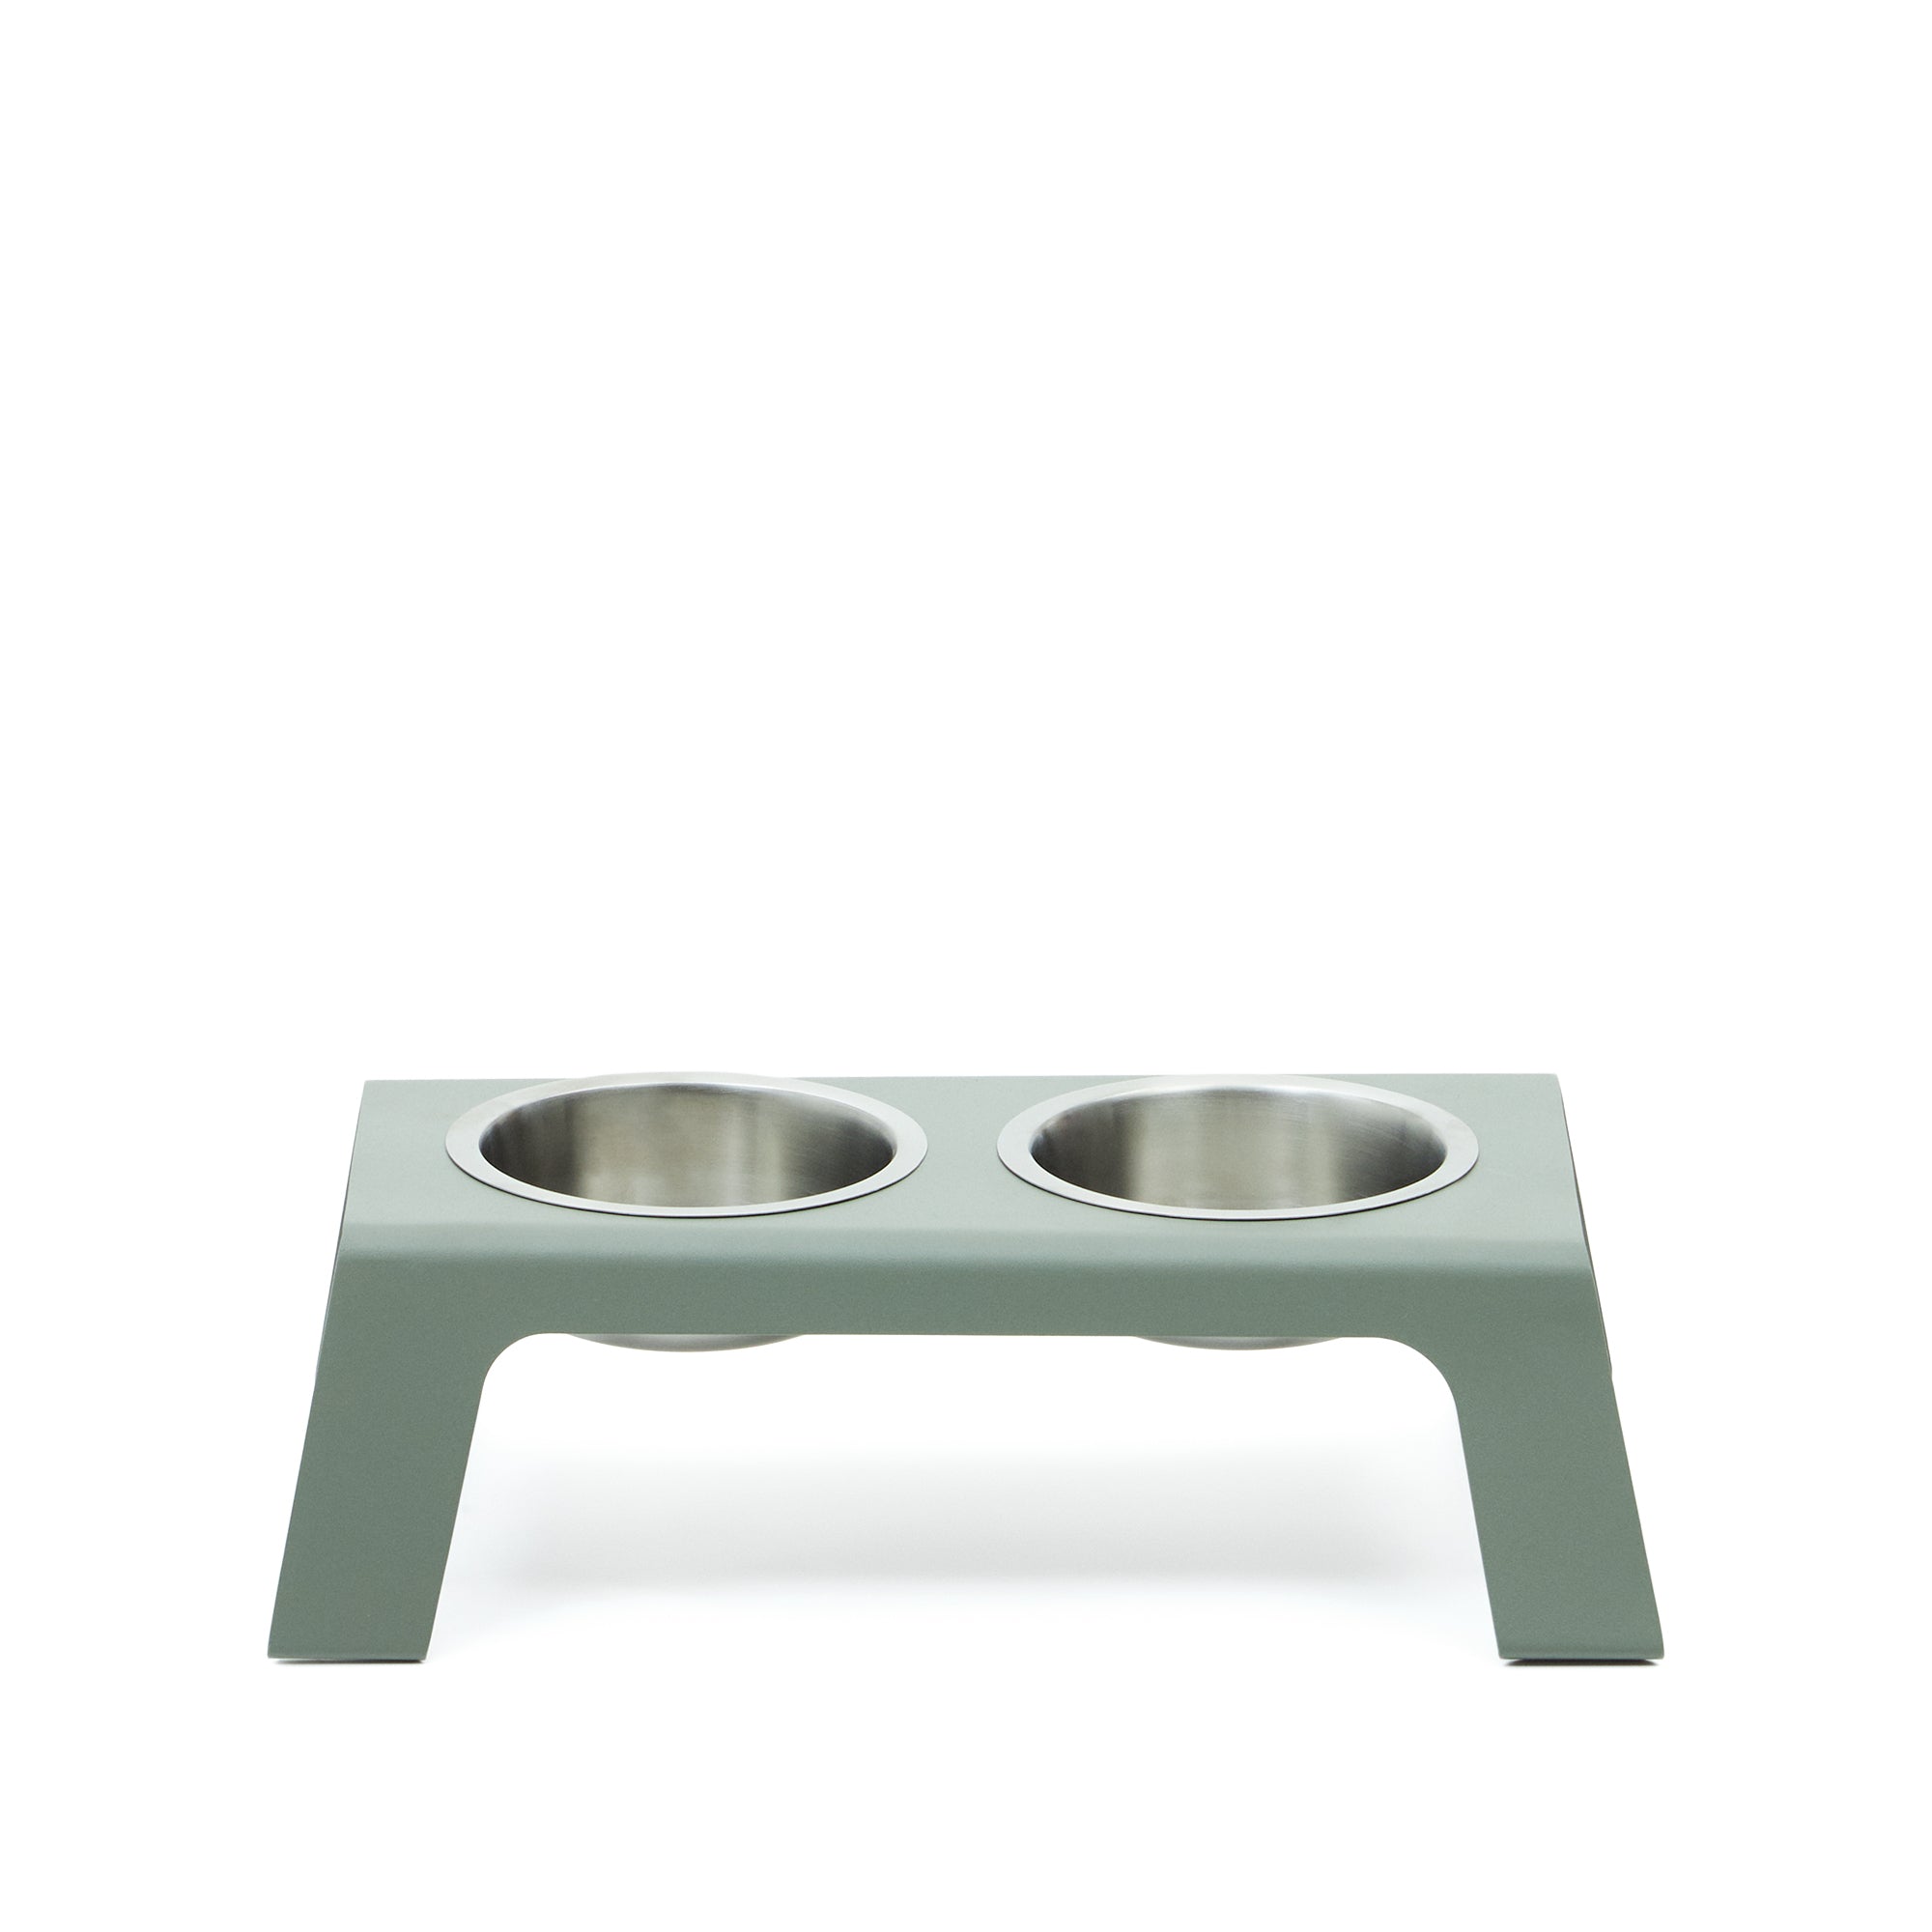 Rocky  food/water bowl for pets with support in green stainless steel, 40 x 25 cm